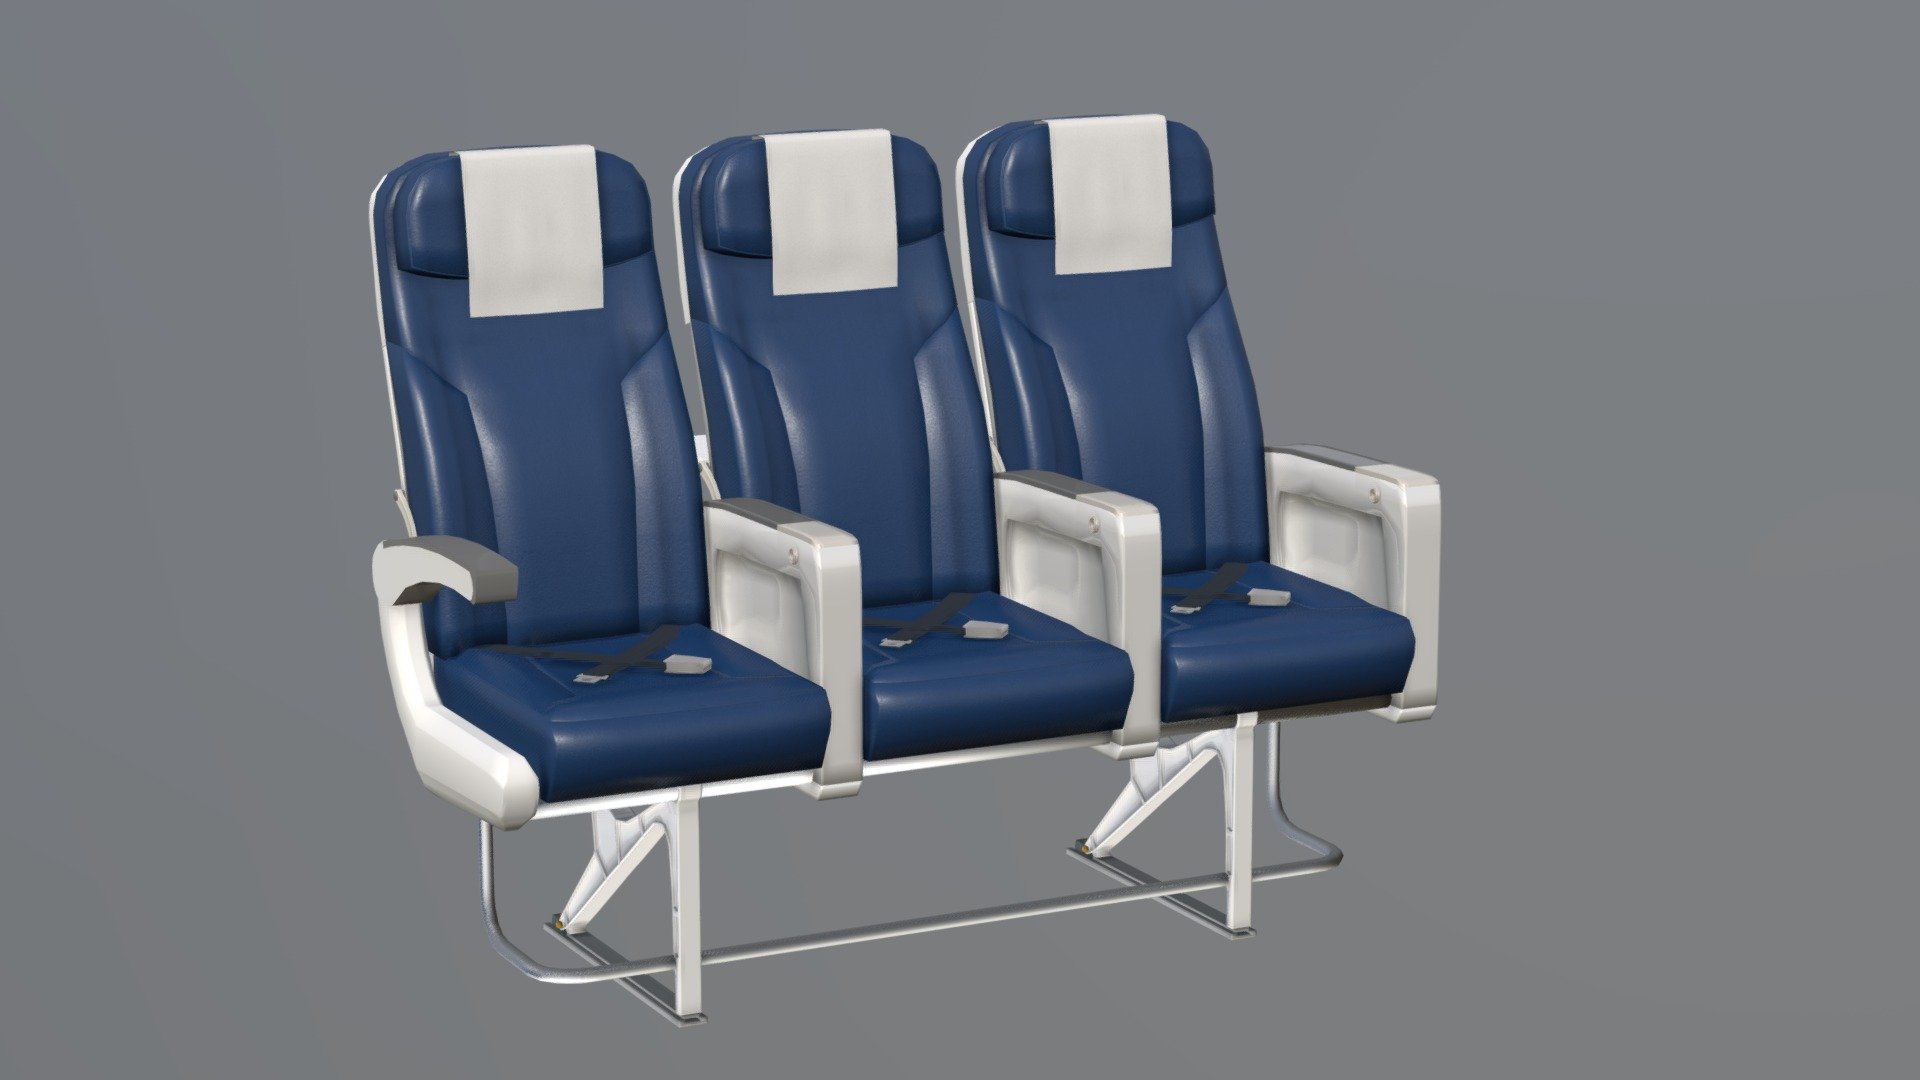 Airplane Chair V3 is a high quality model to add more details and realism to your rendering projects. Fully detailed, textured model. Detailed enough for close-up renders.

Features: - Model resolutions are optimized for polygon efficiencymesh smooth function can be used to increase mesh resolution if necessary) 3d model